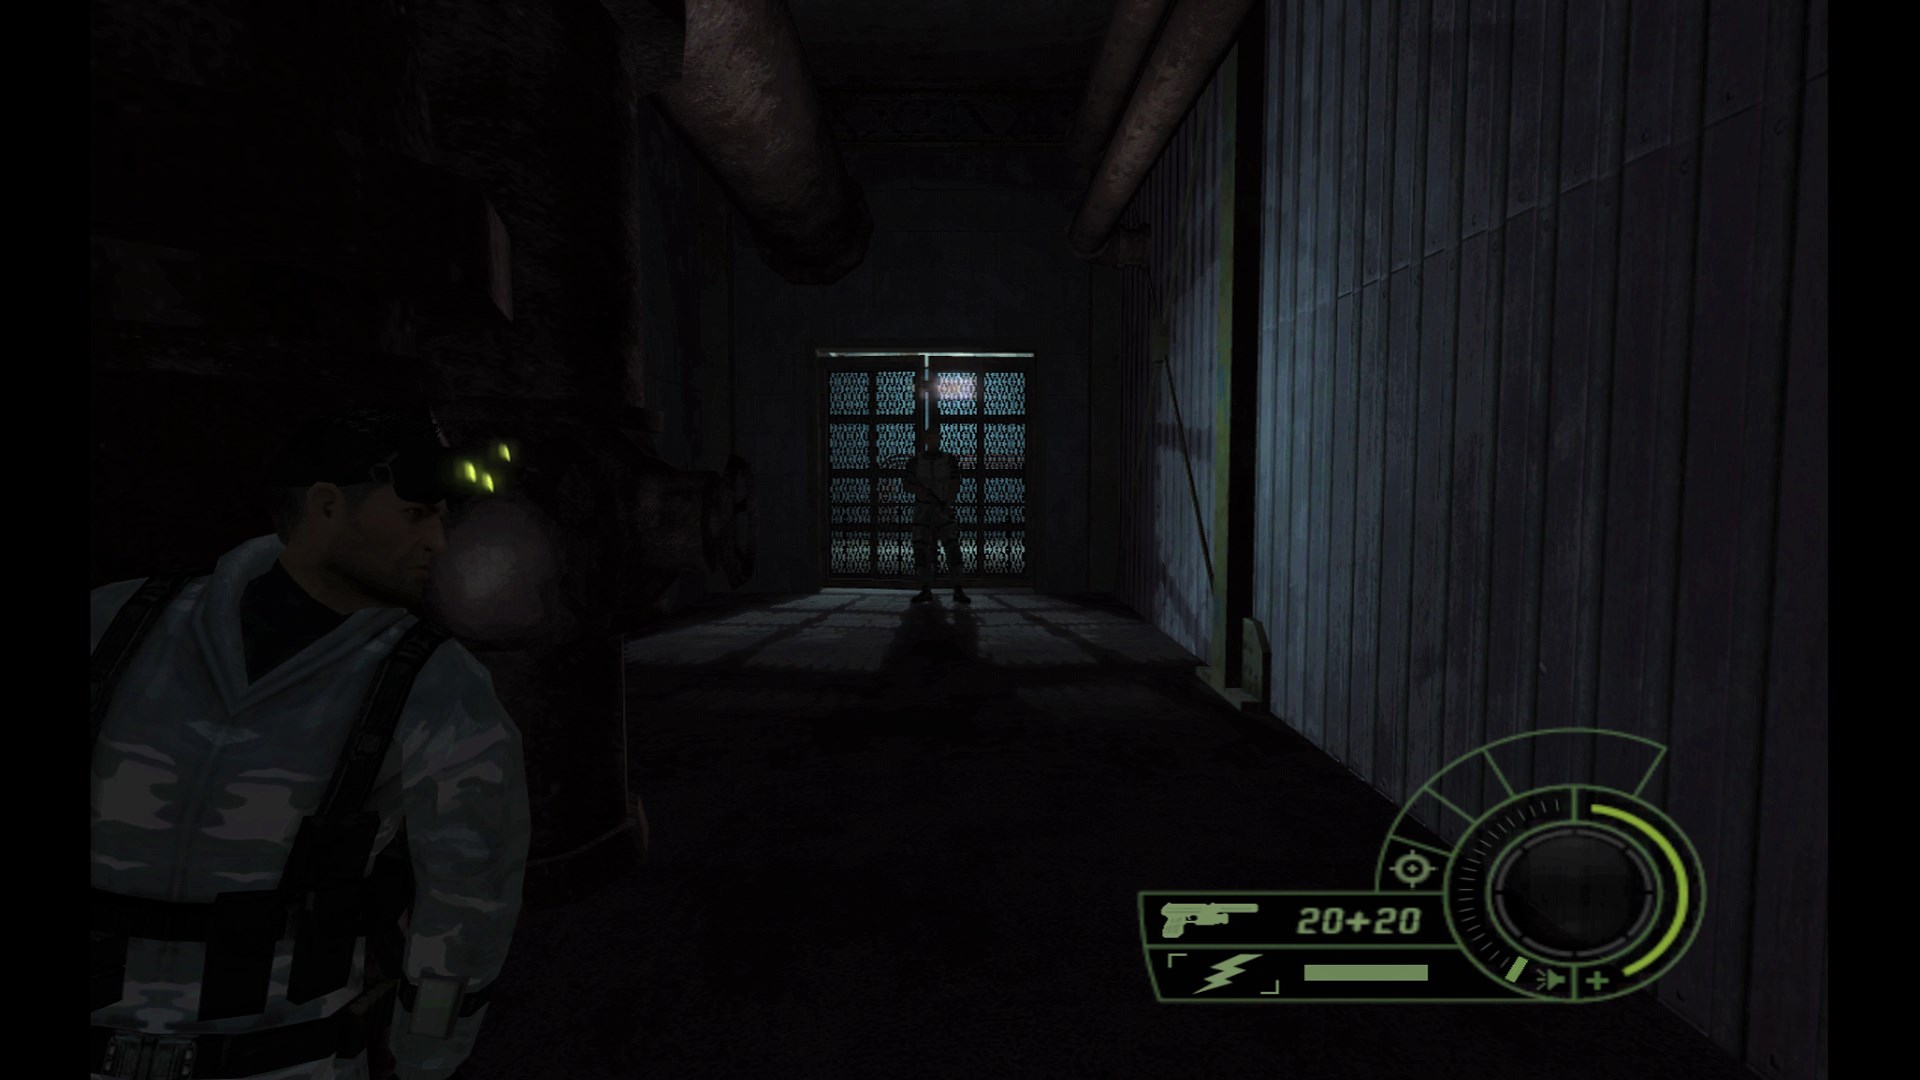 Splinter Cell: Double Agent review